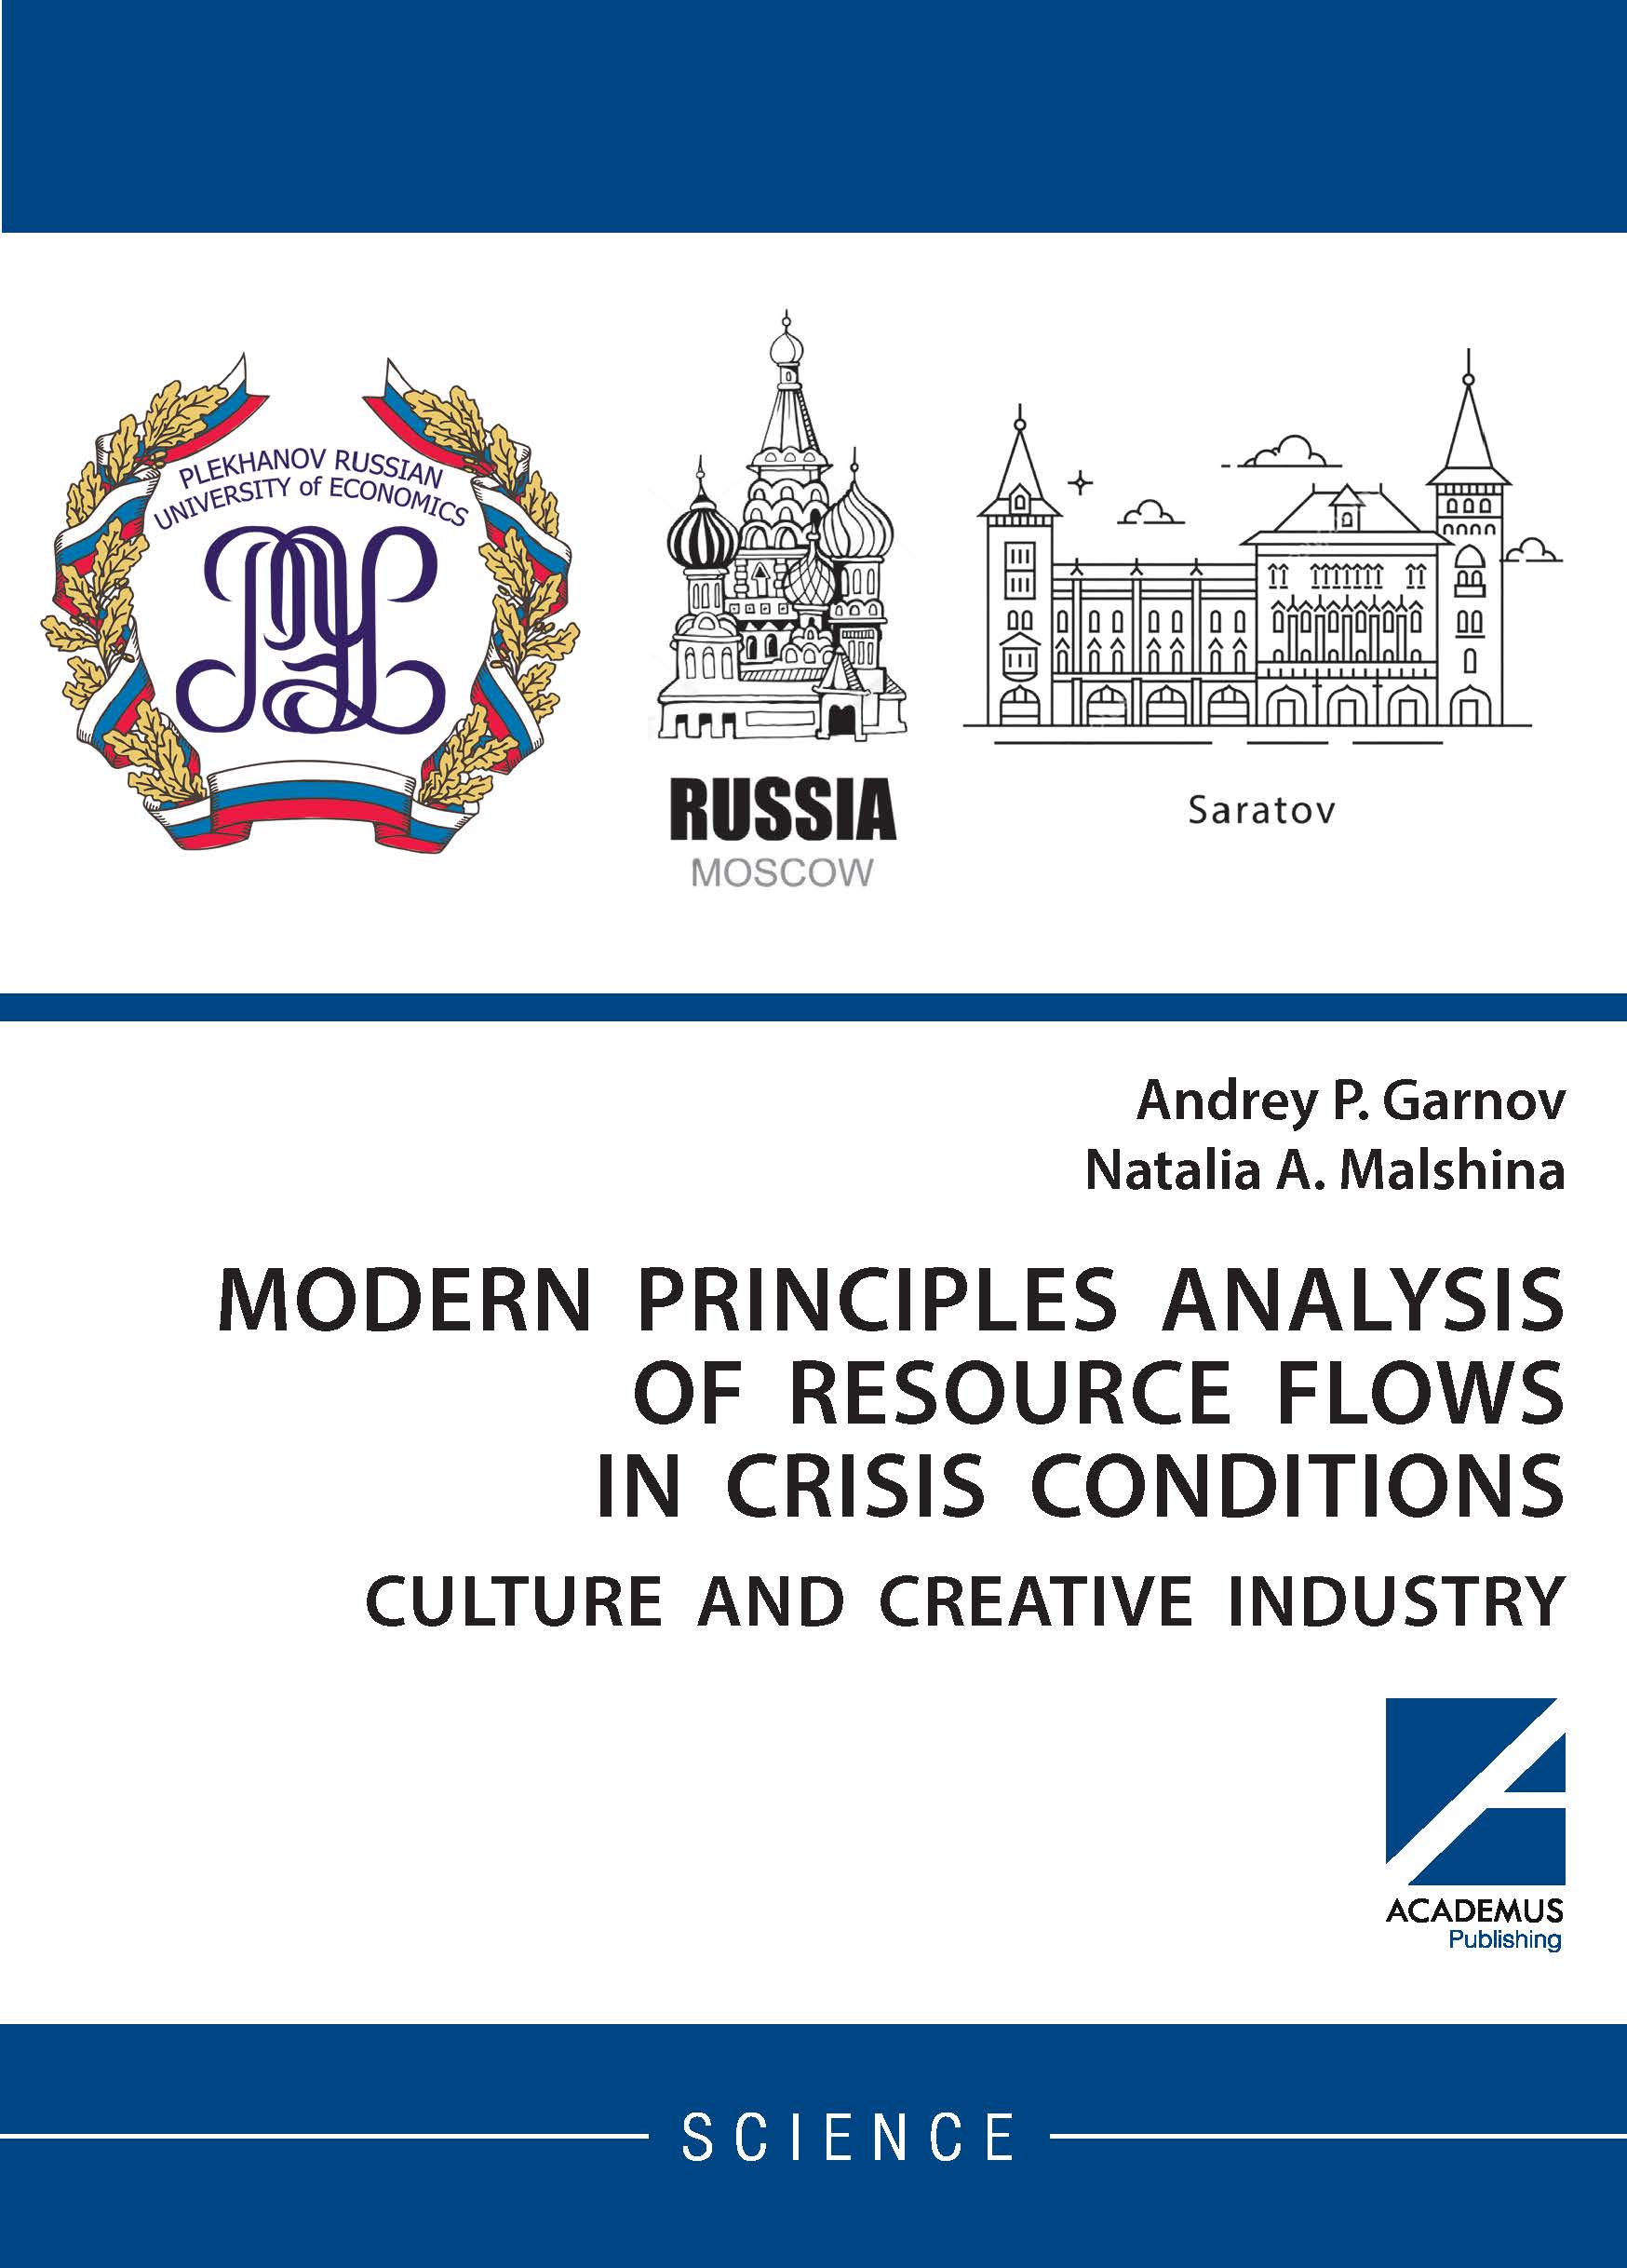                         MODERN PRINCIPLES ANALYSIS OF RESOURCE FLOWS IN CRISIS CONDITIONS: CULTURE AND CREATIVE INDUSTRY
            